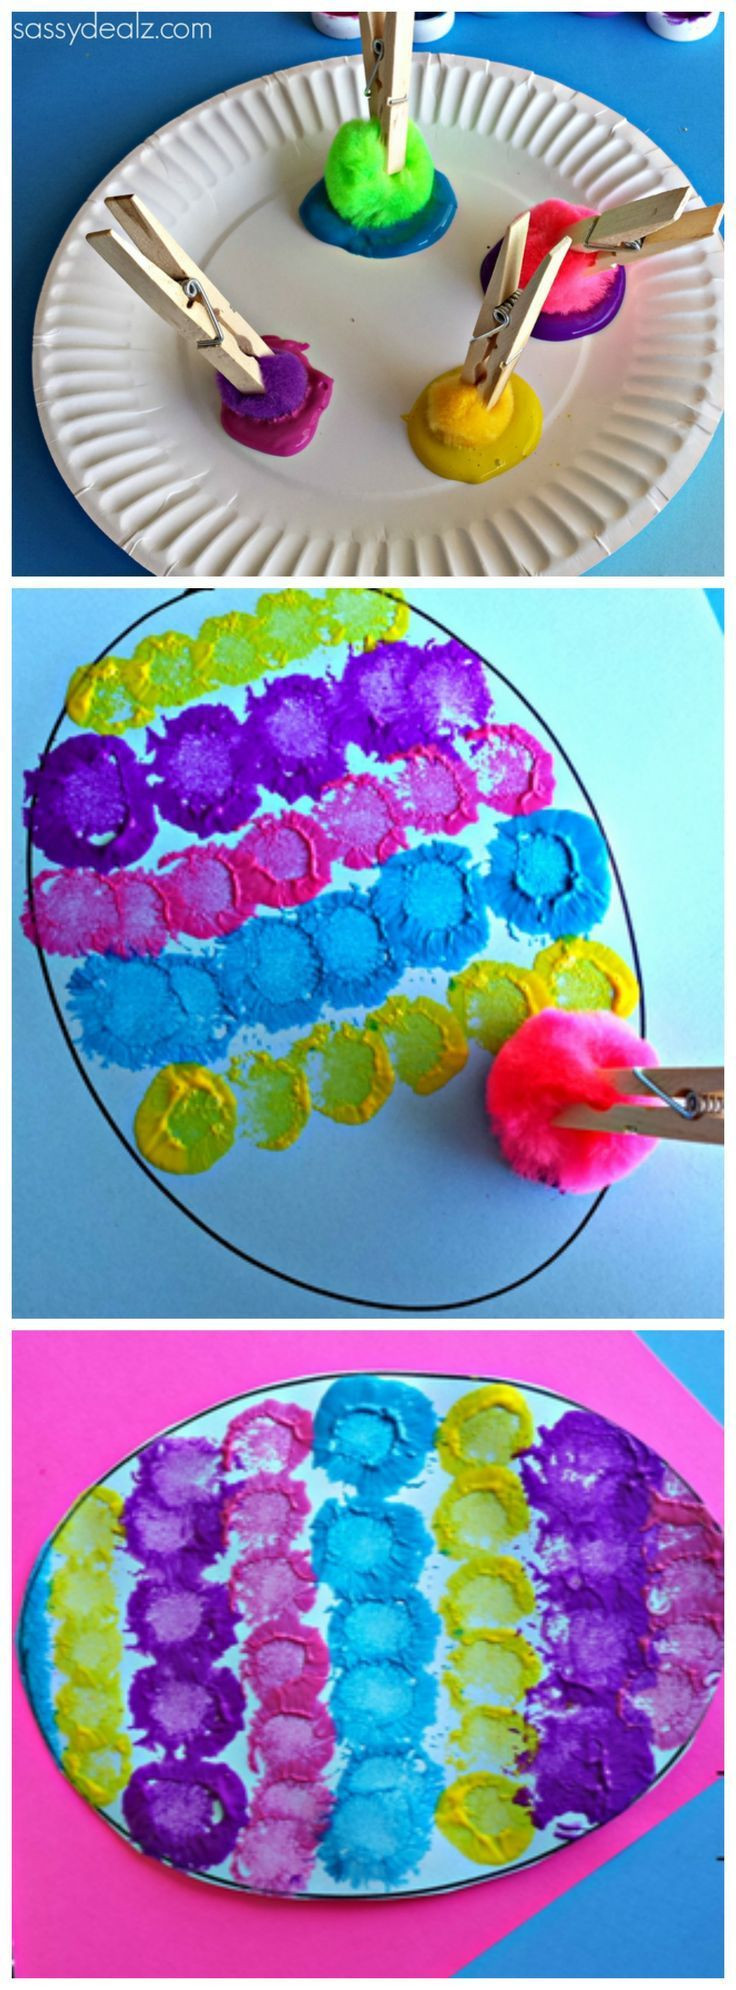 Spring Crafts For Kids
 6 Amazing craft activities for kids